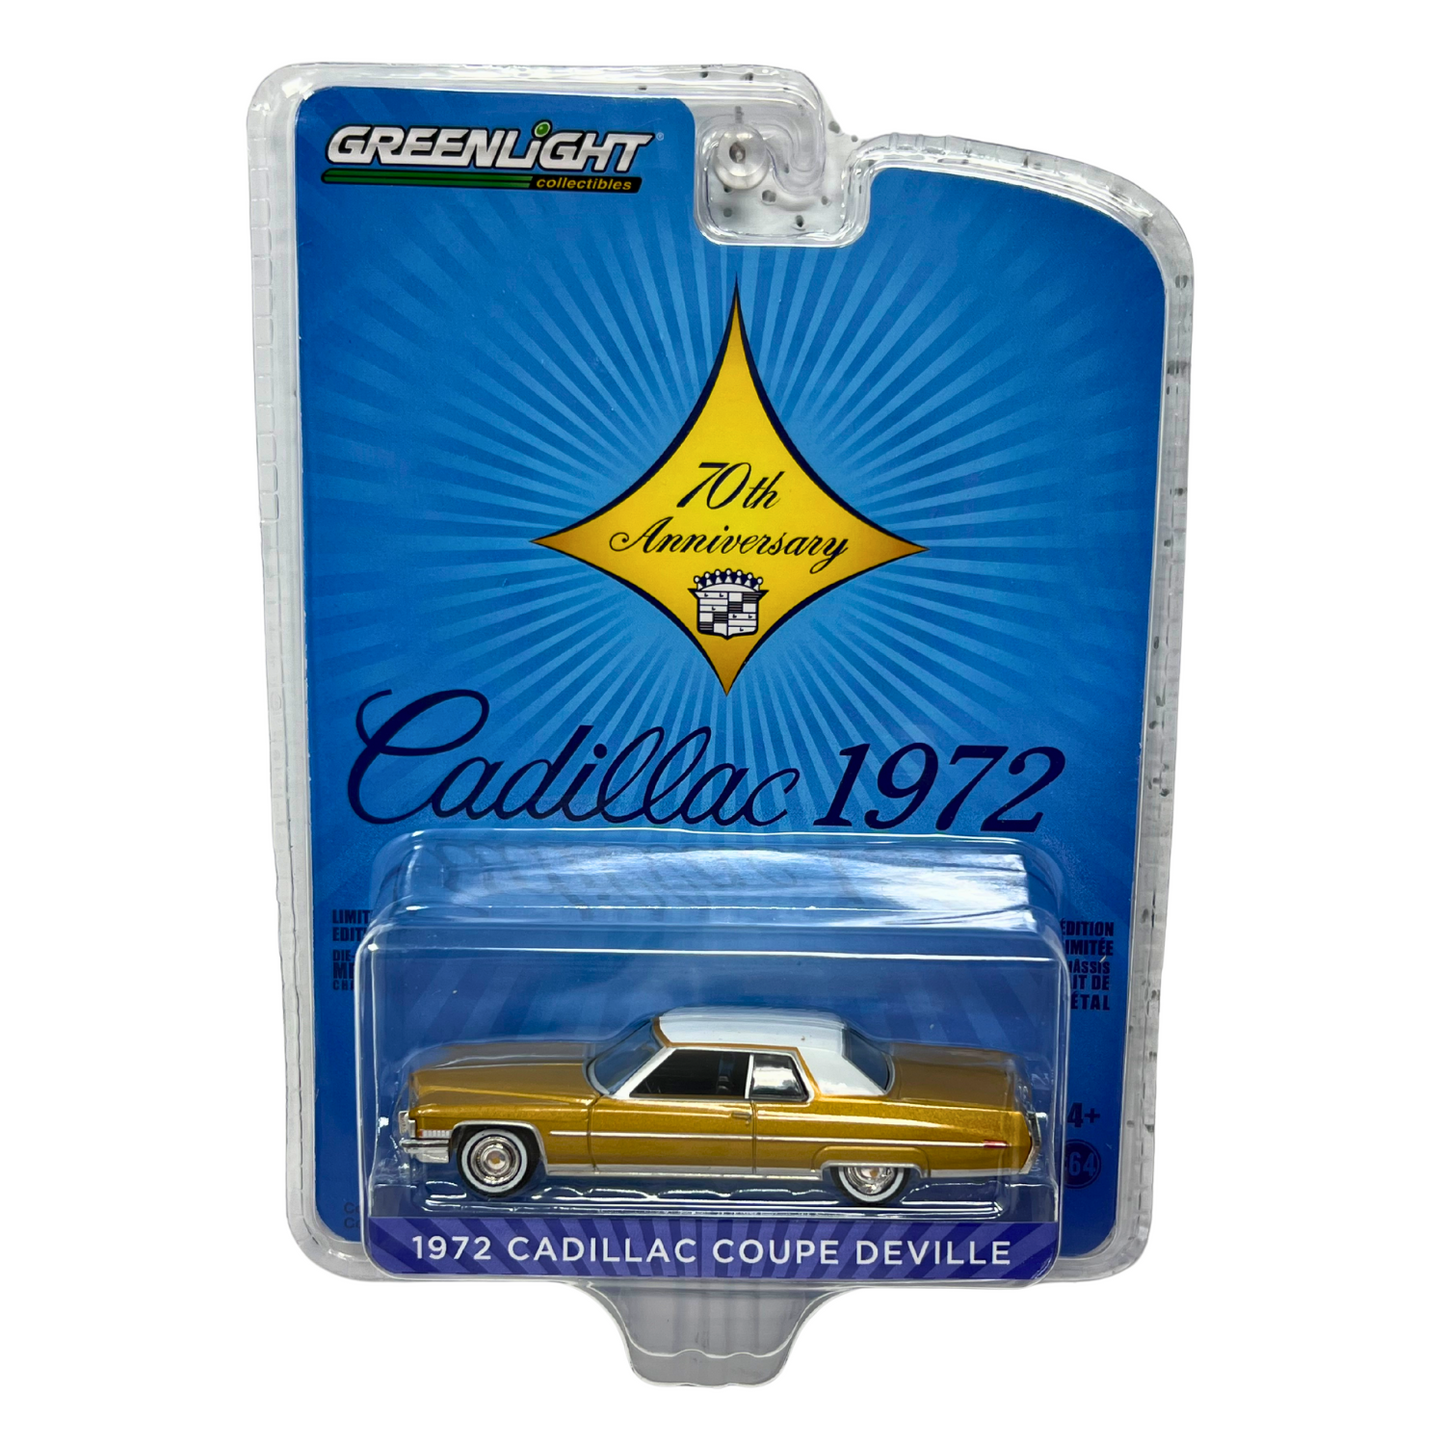 Greenlight Cadillac 70th Anniversary 1972 Cadillac Coupe Deville 1:64 Diecast